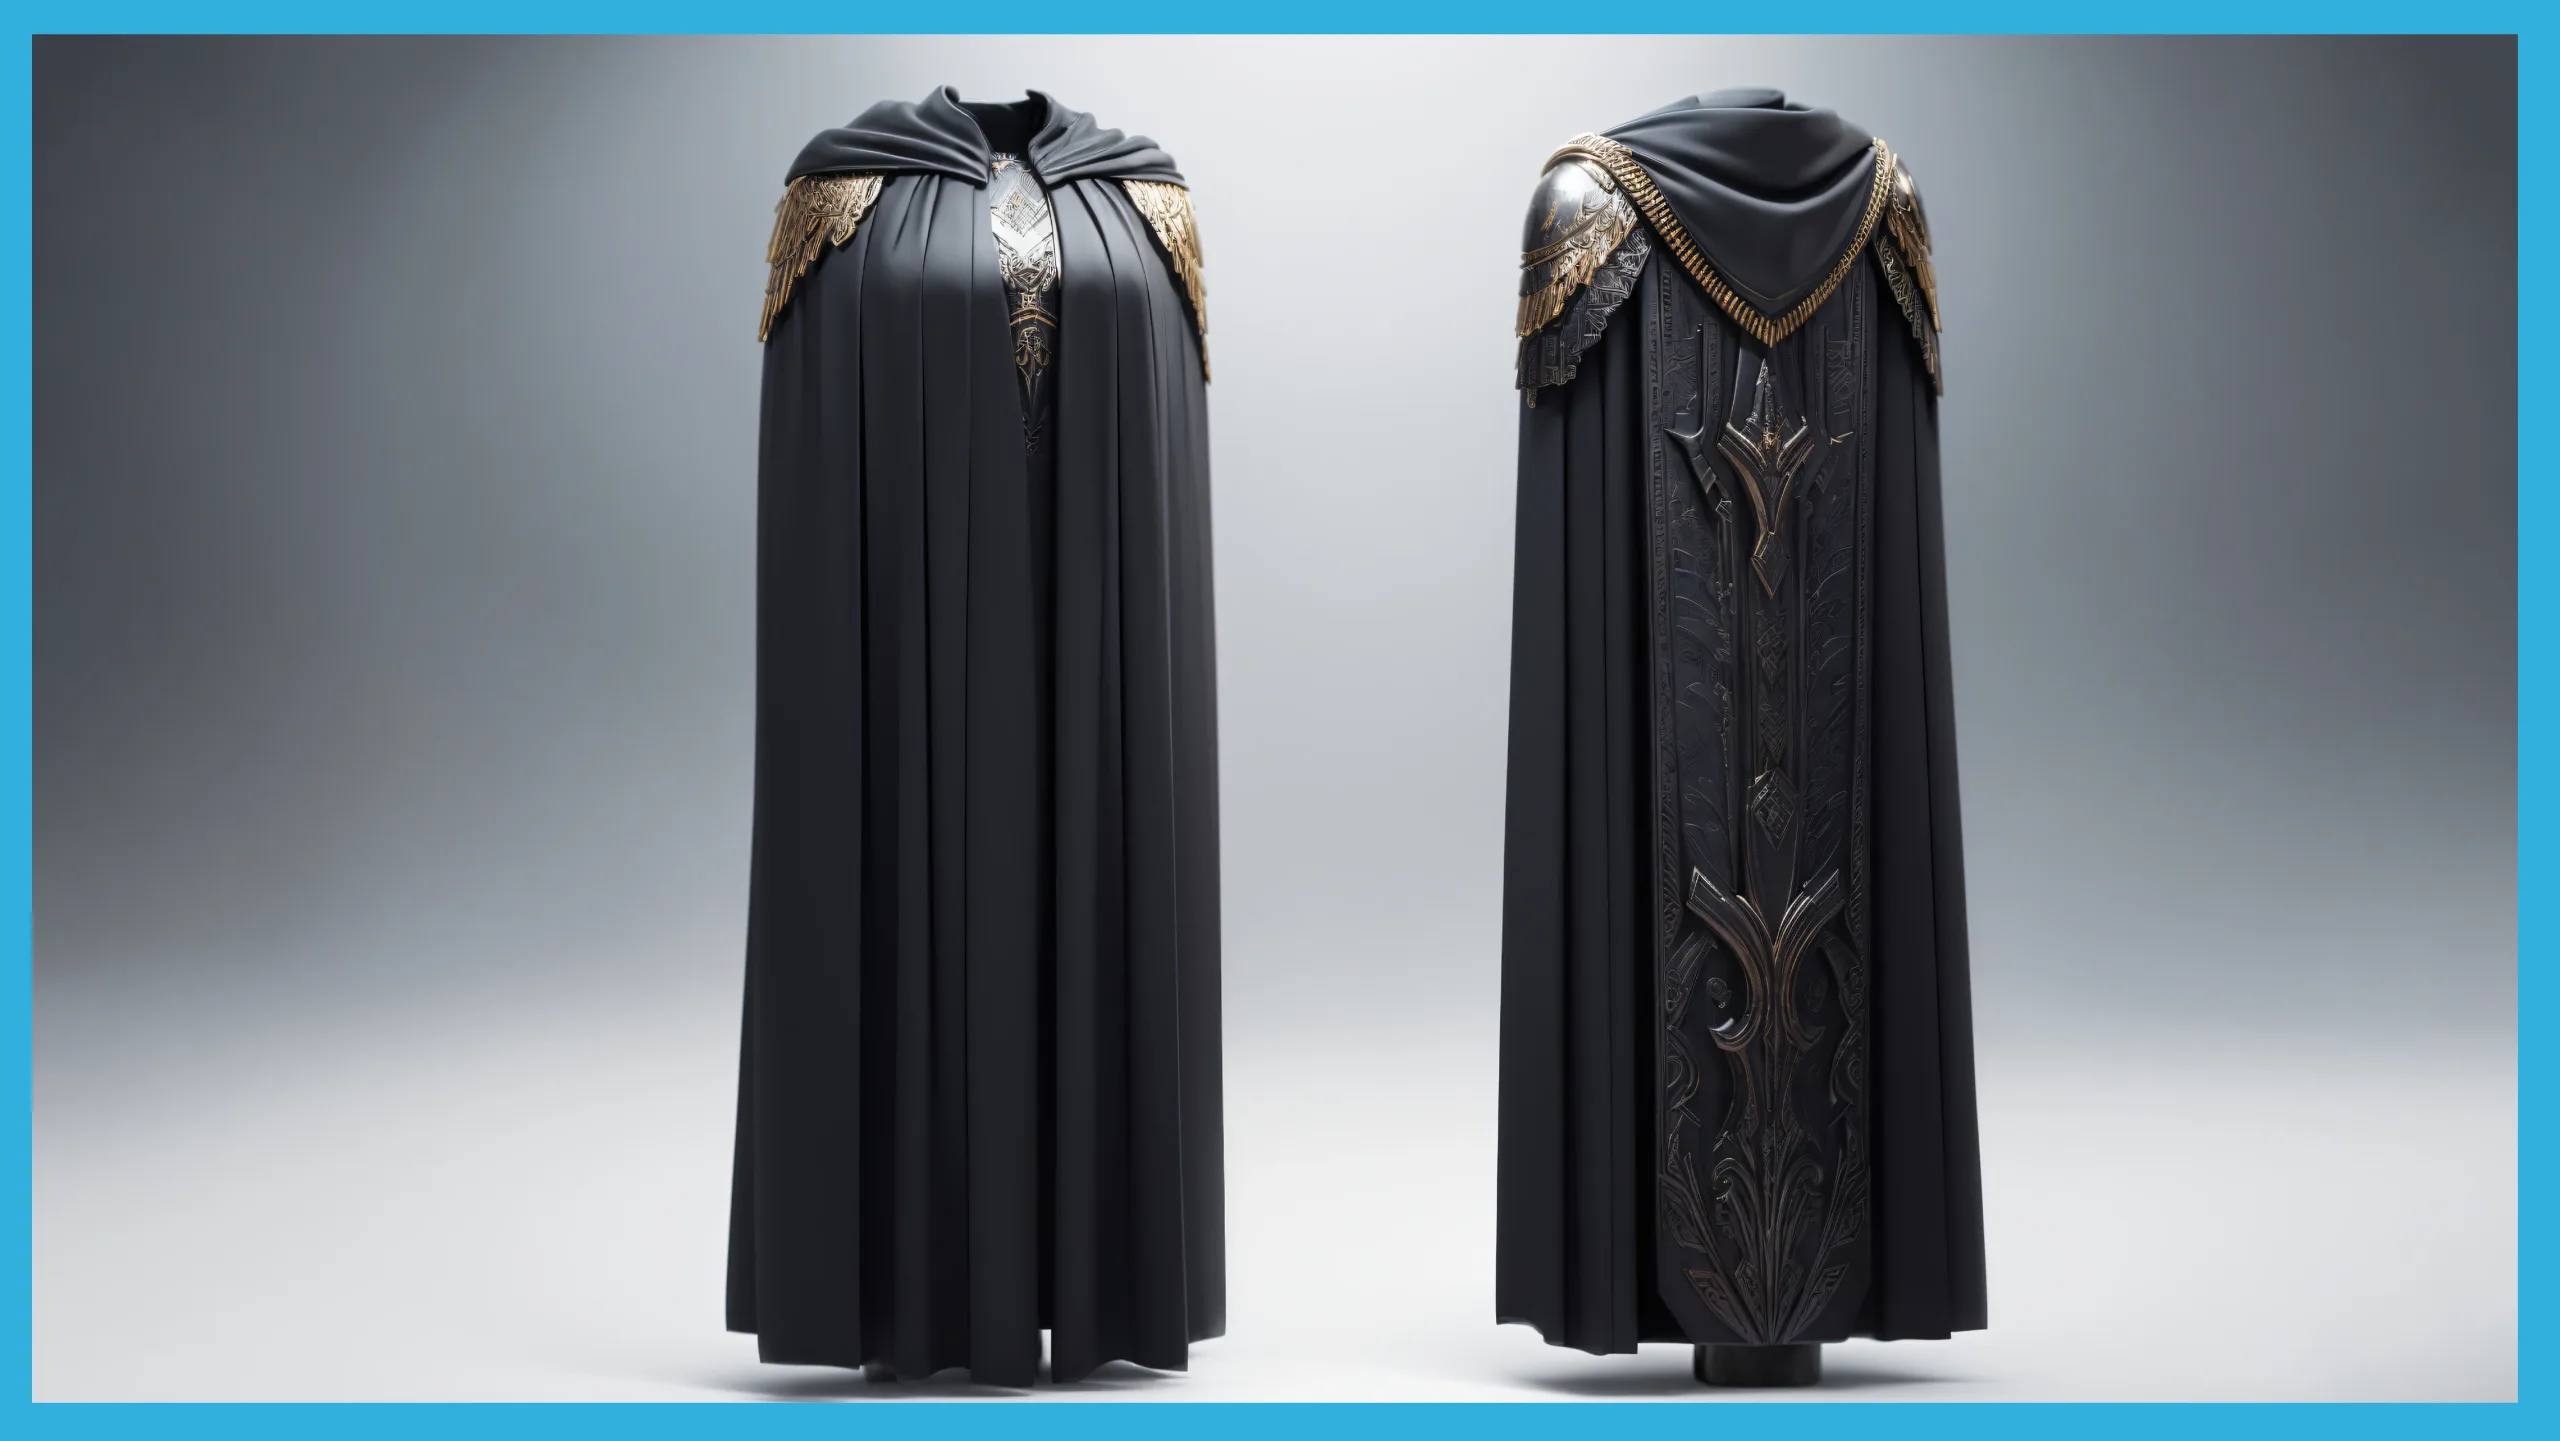 10 + 8 Capes Basemesh Models + Reference Images for texturing + Bonus + Project Files